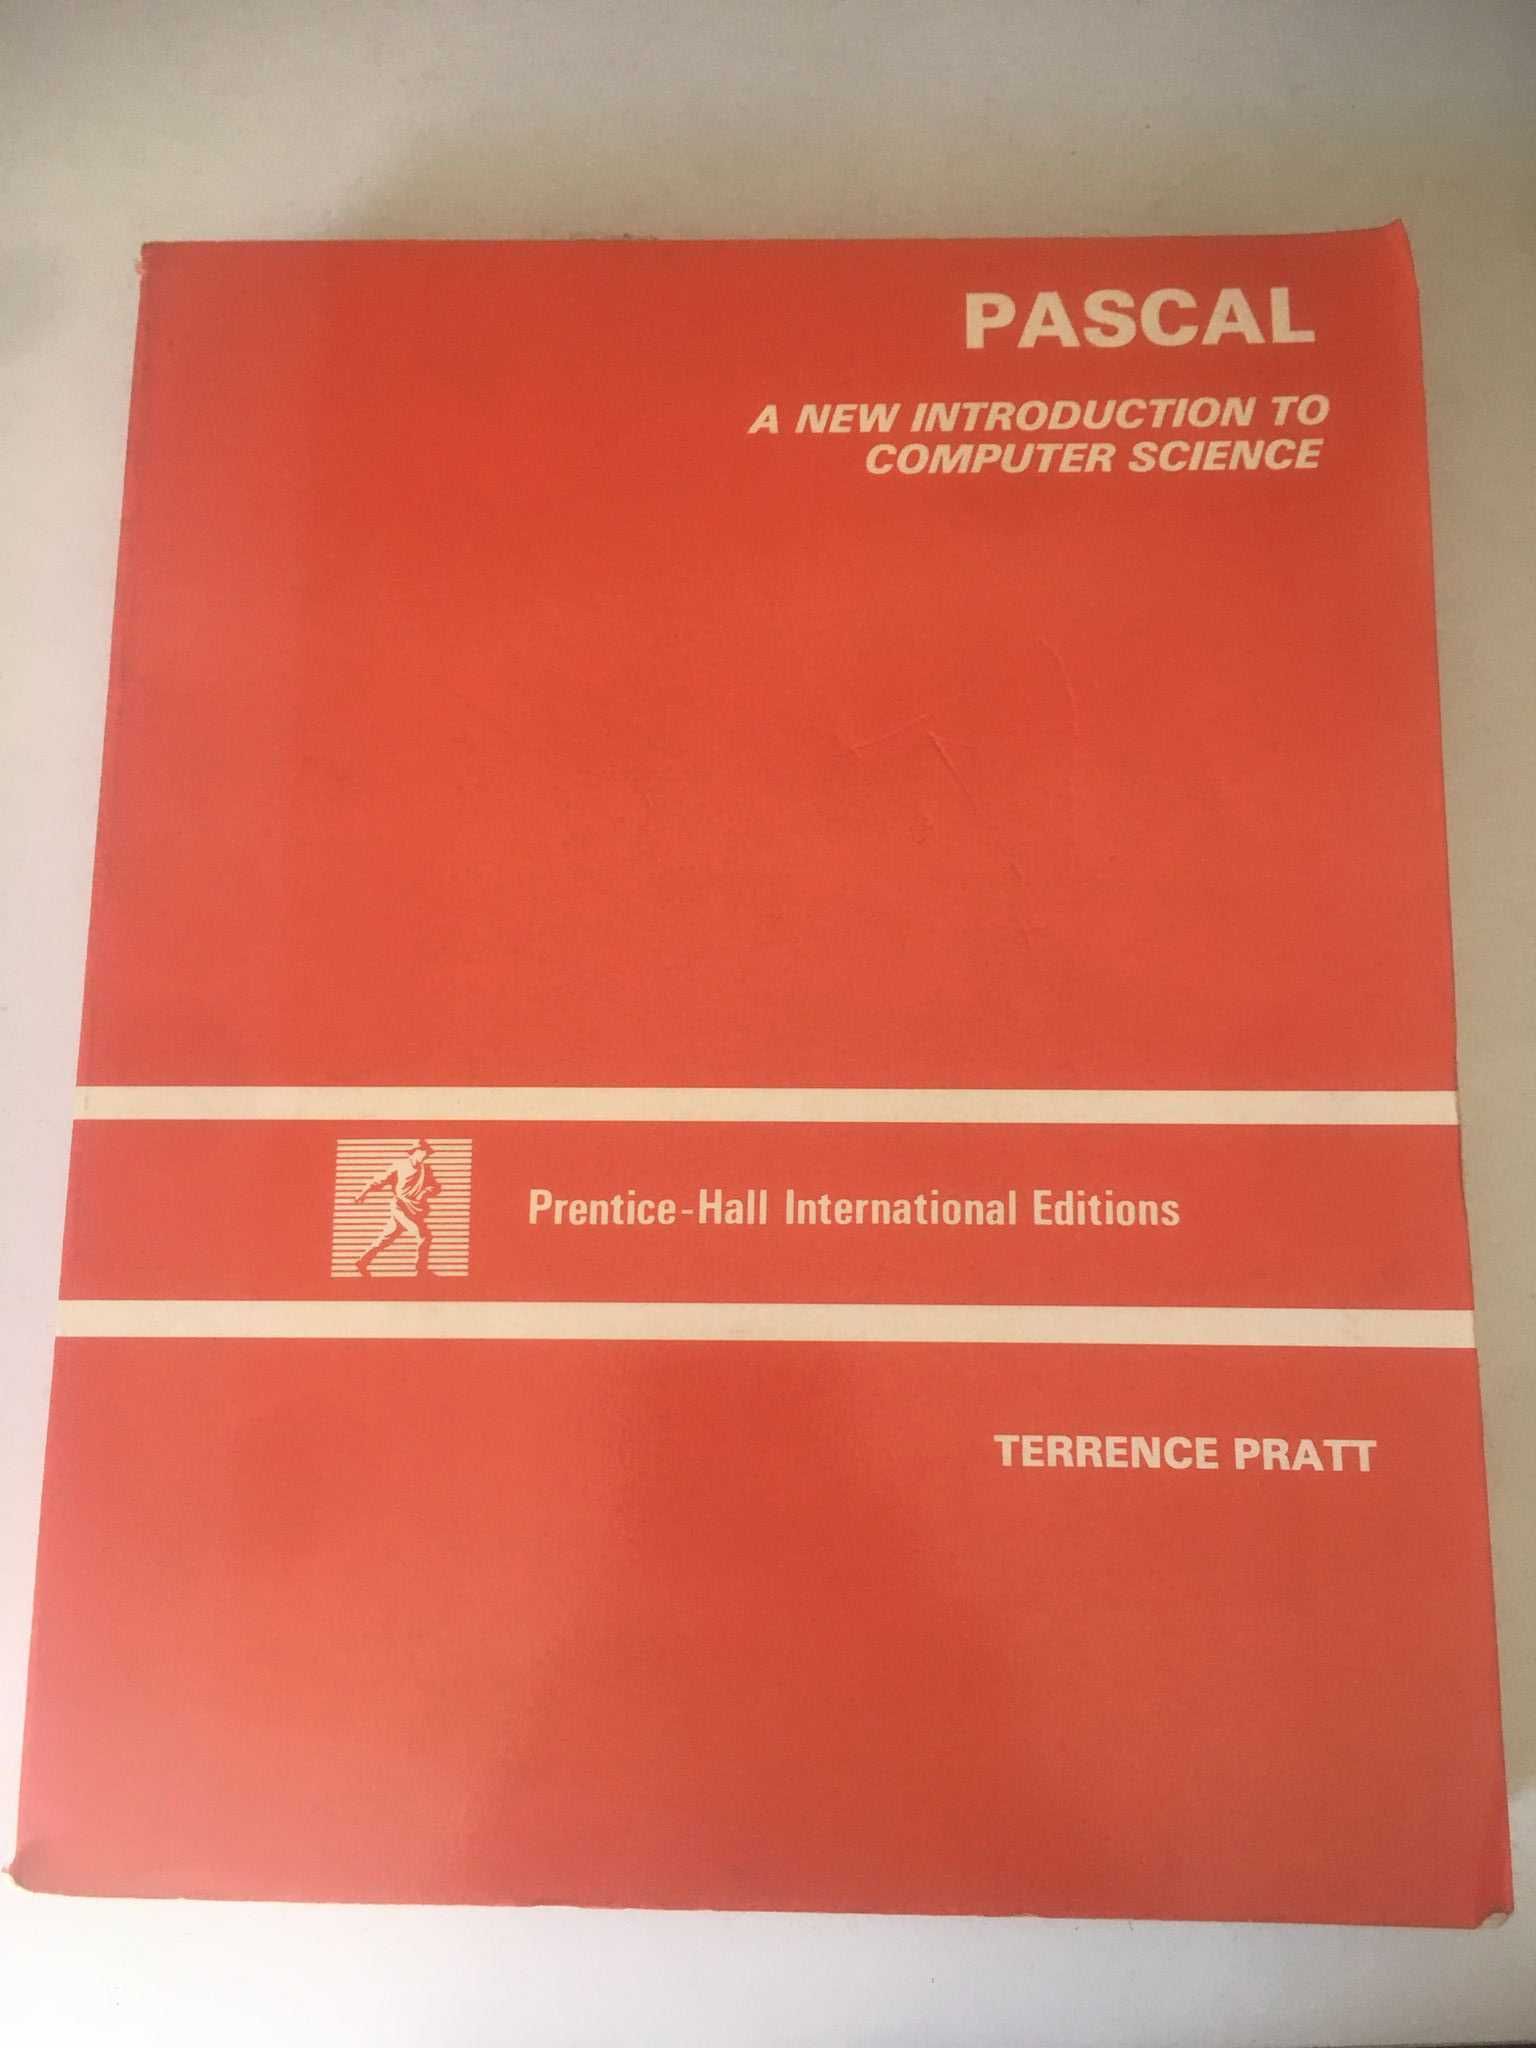 Livro - Pascal A New Introduction to Computer Science (Terrence Pratt)